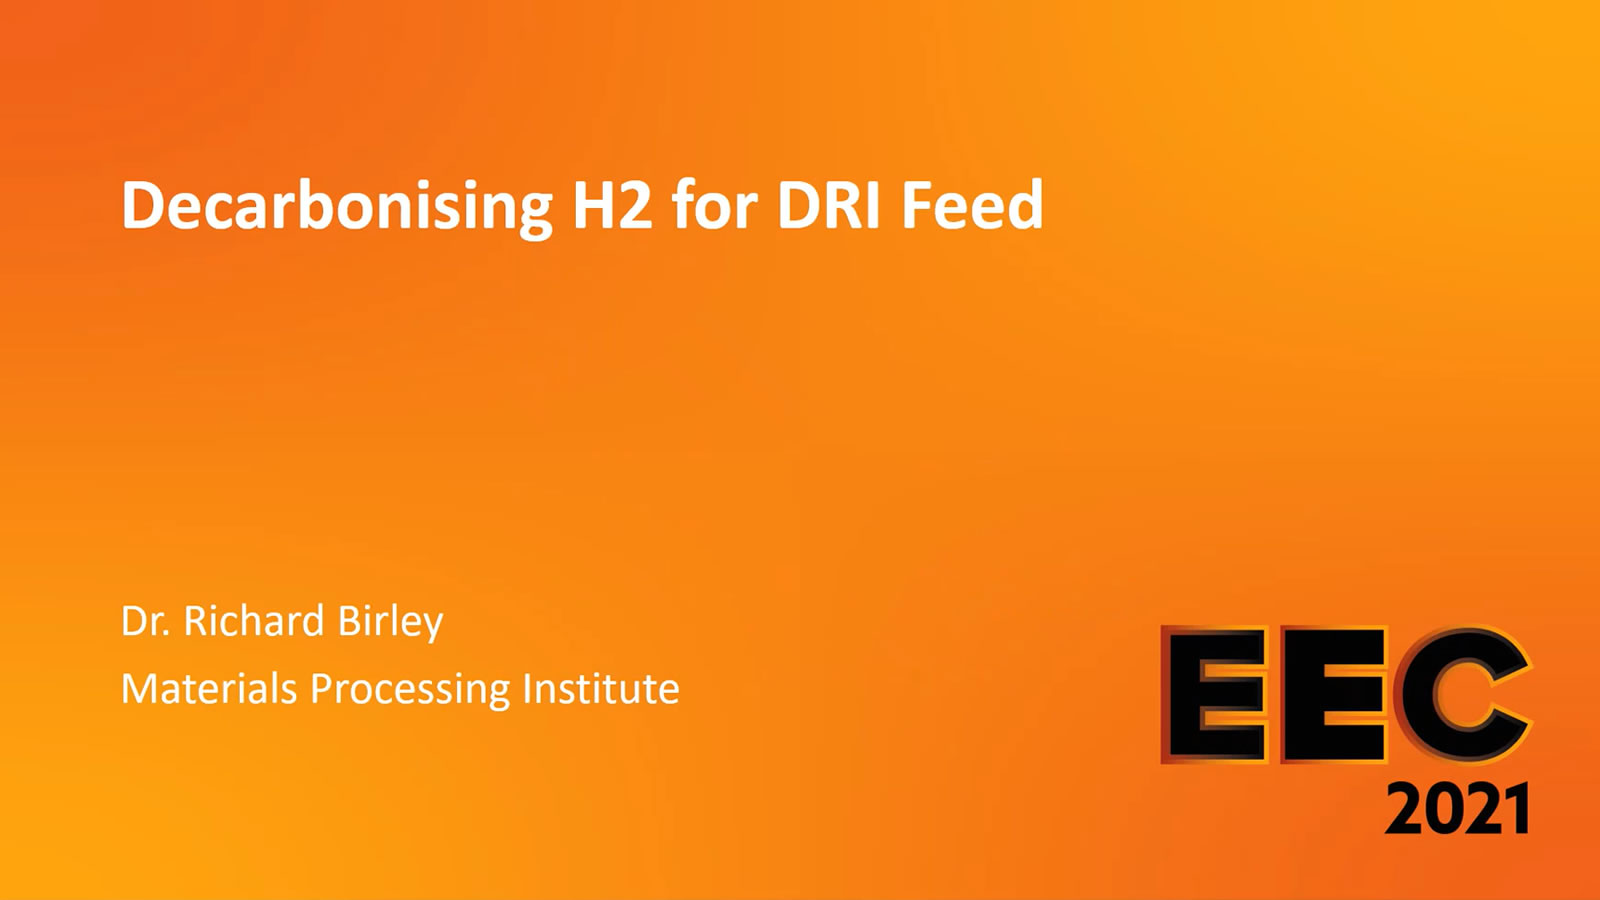 Decarbonising H2 for DRI Feed - Dr Richard Birley at EEC 2021